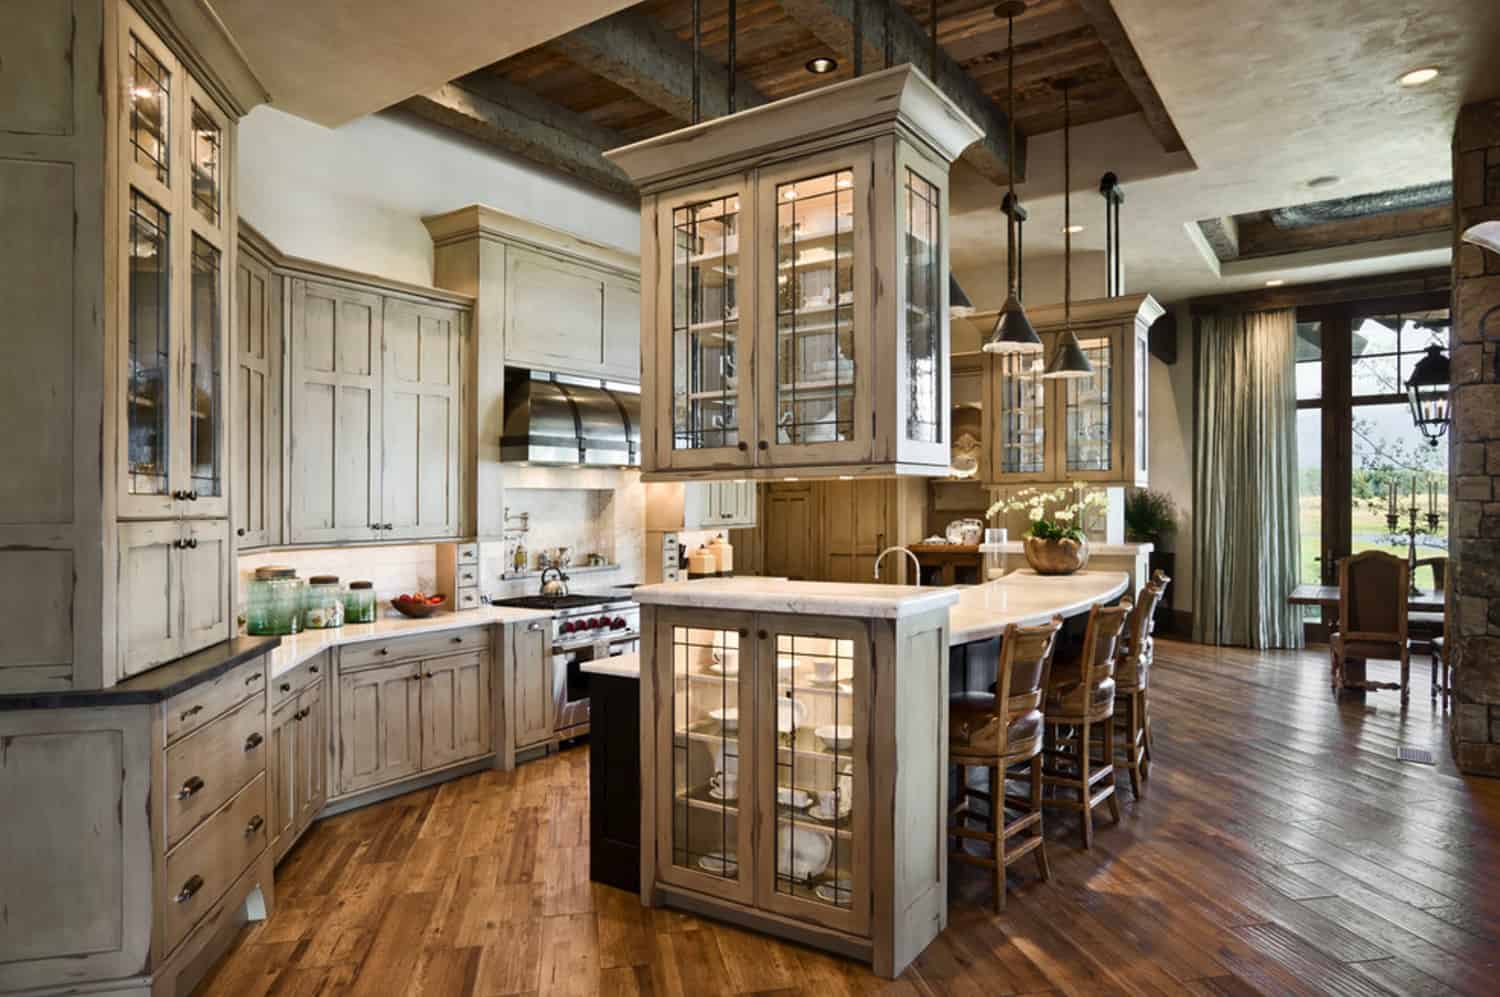 residence-rustic-kitchen